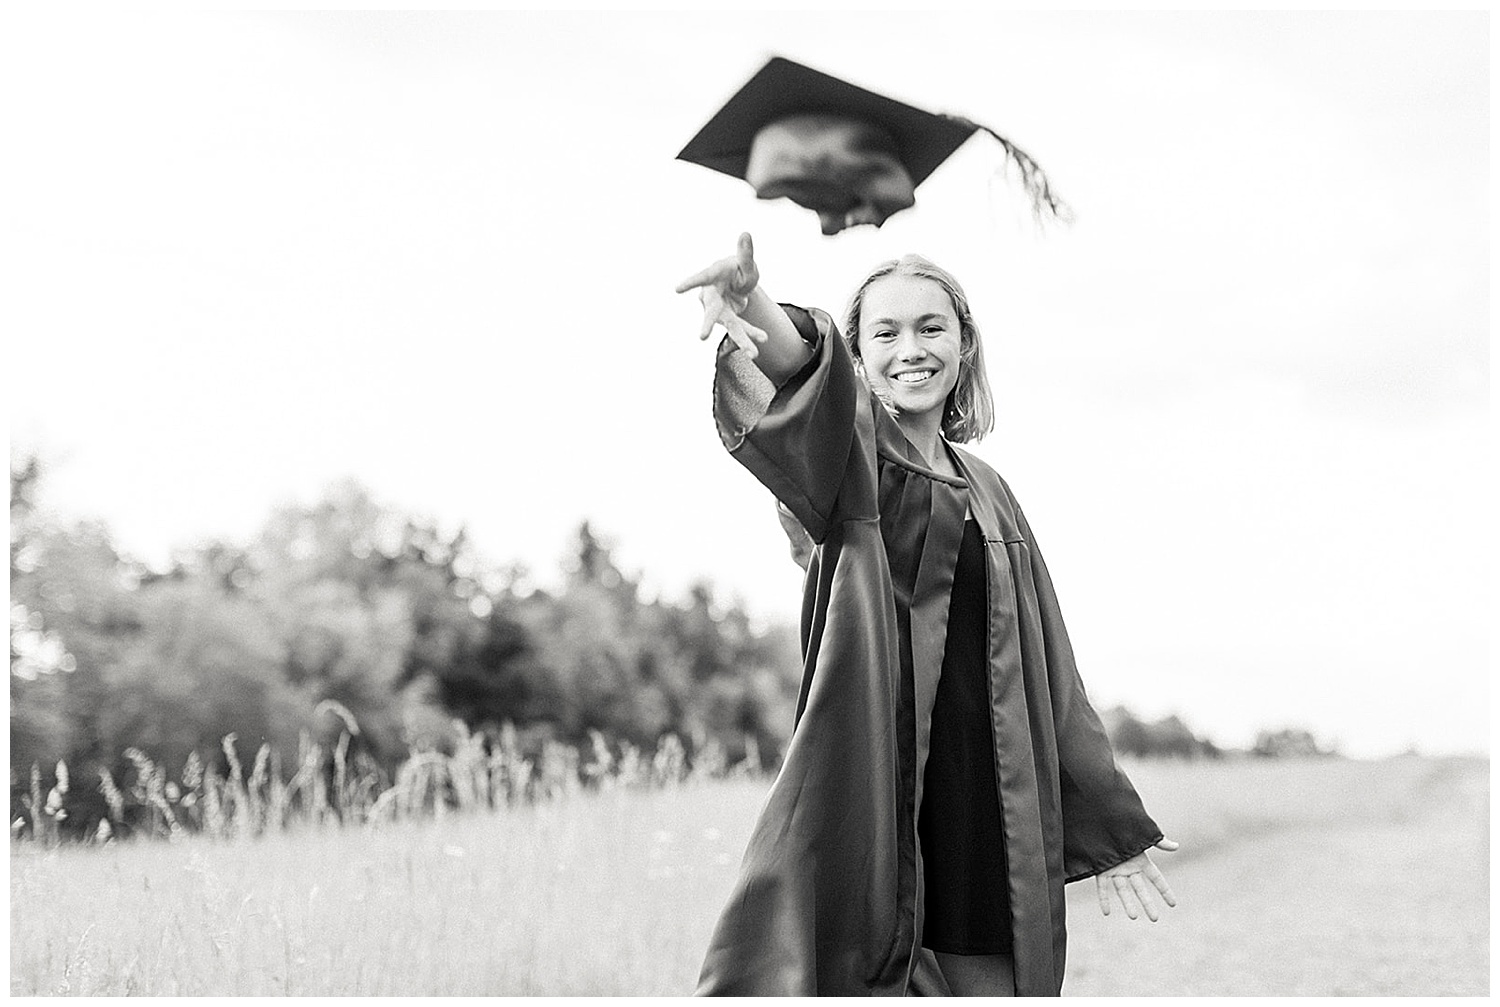 Knoxville, TN high school senior session graduation, robe, and hat photo by Holly Michon Photography